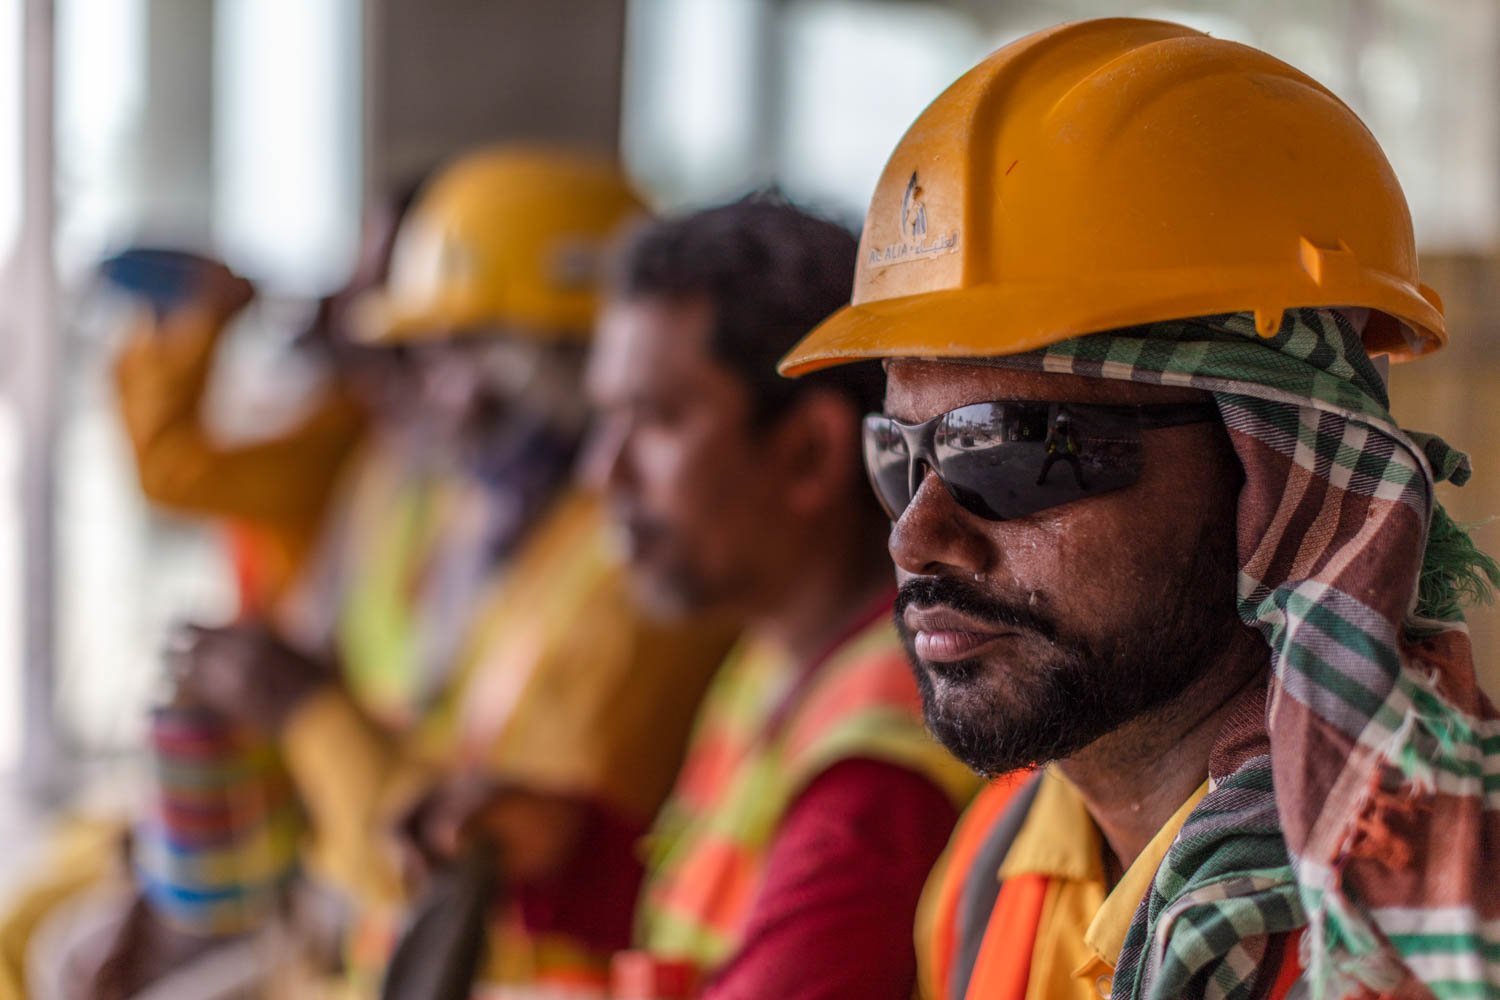  Workers at a construction site in Lusail City, Qatar on August 18, 2022. 